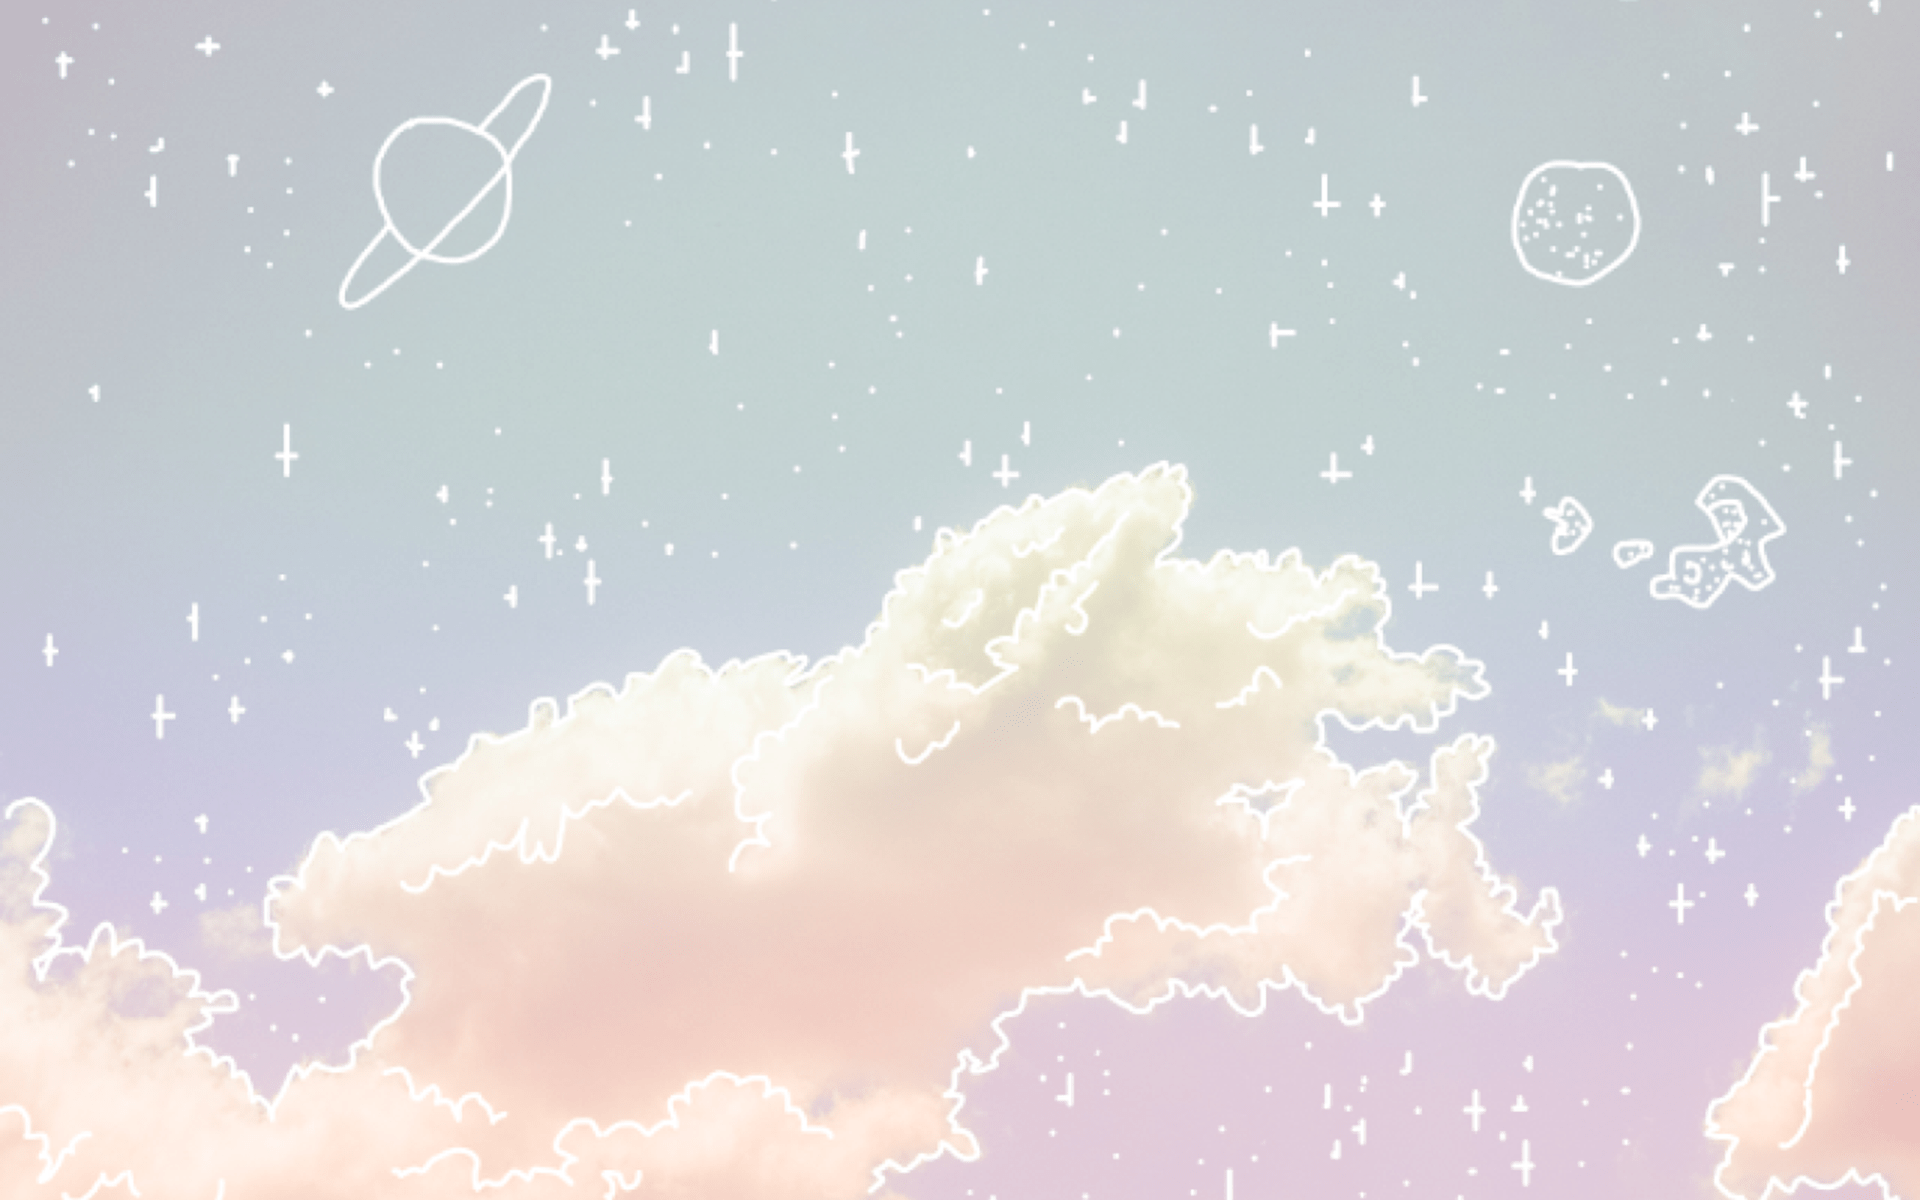 A sky with clouds and stars in it - Space